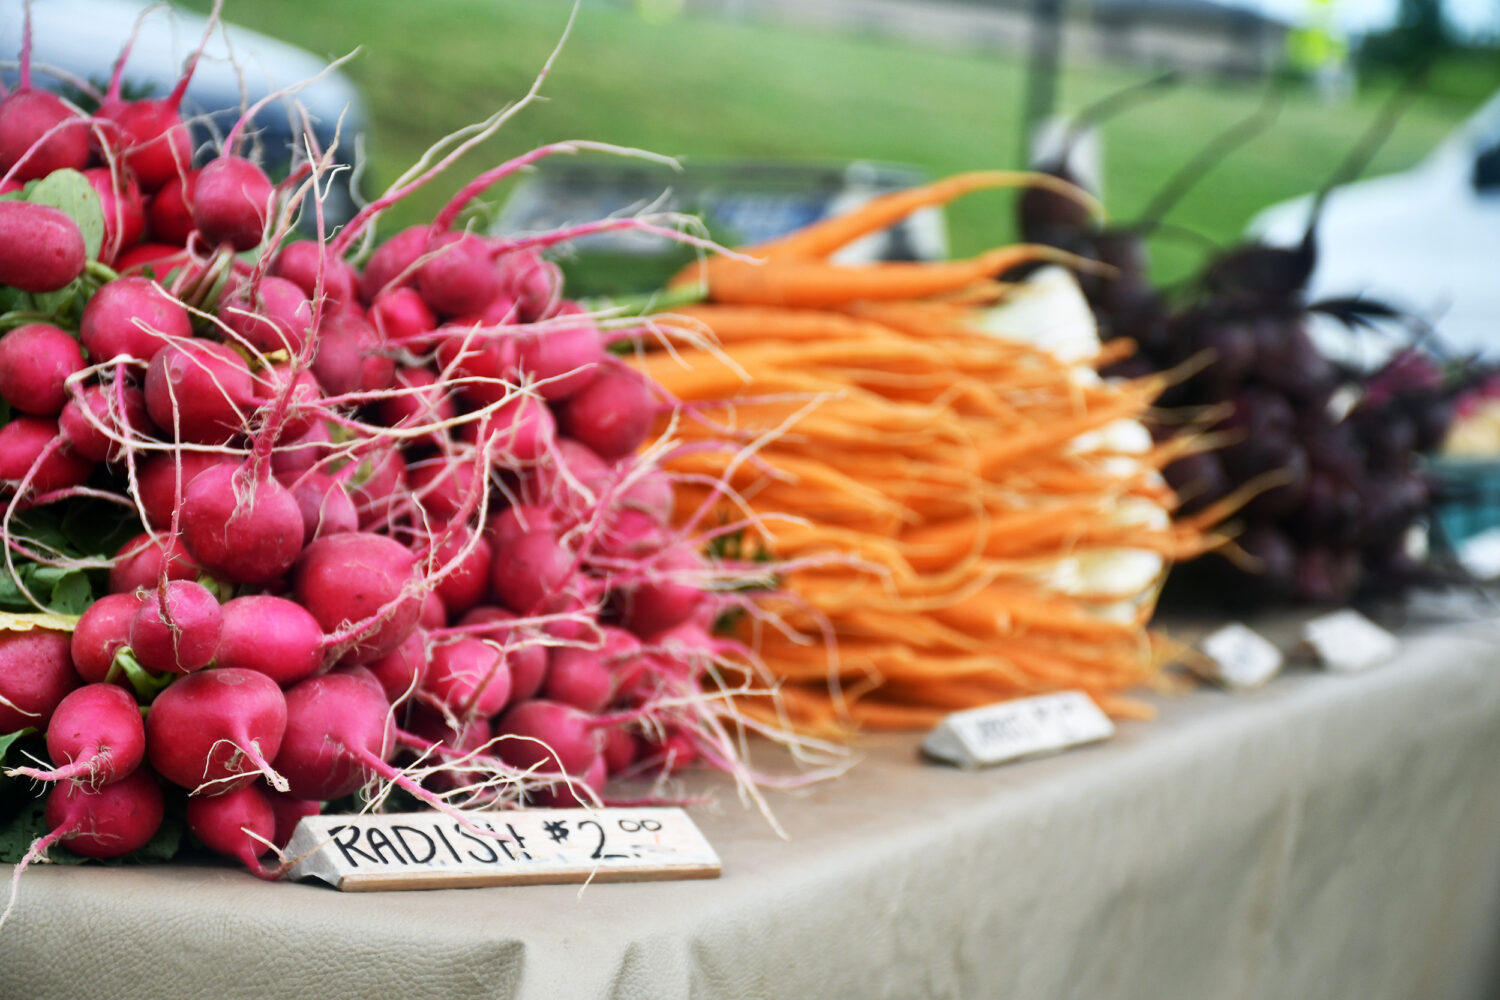 Make the most of your farmers market